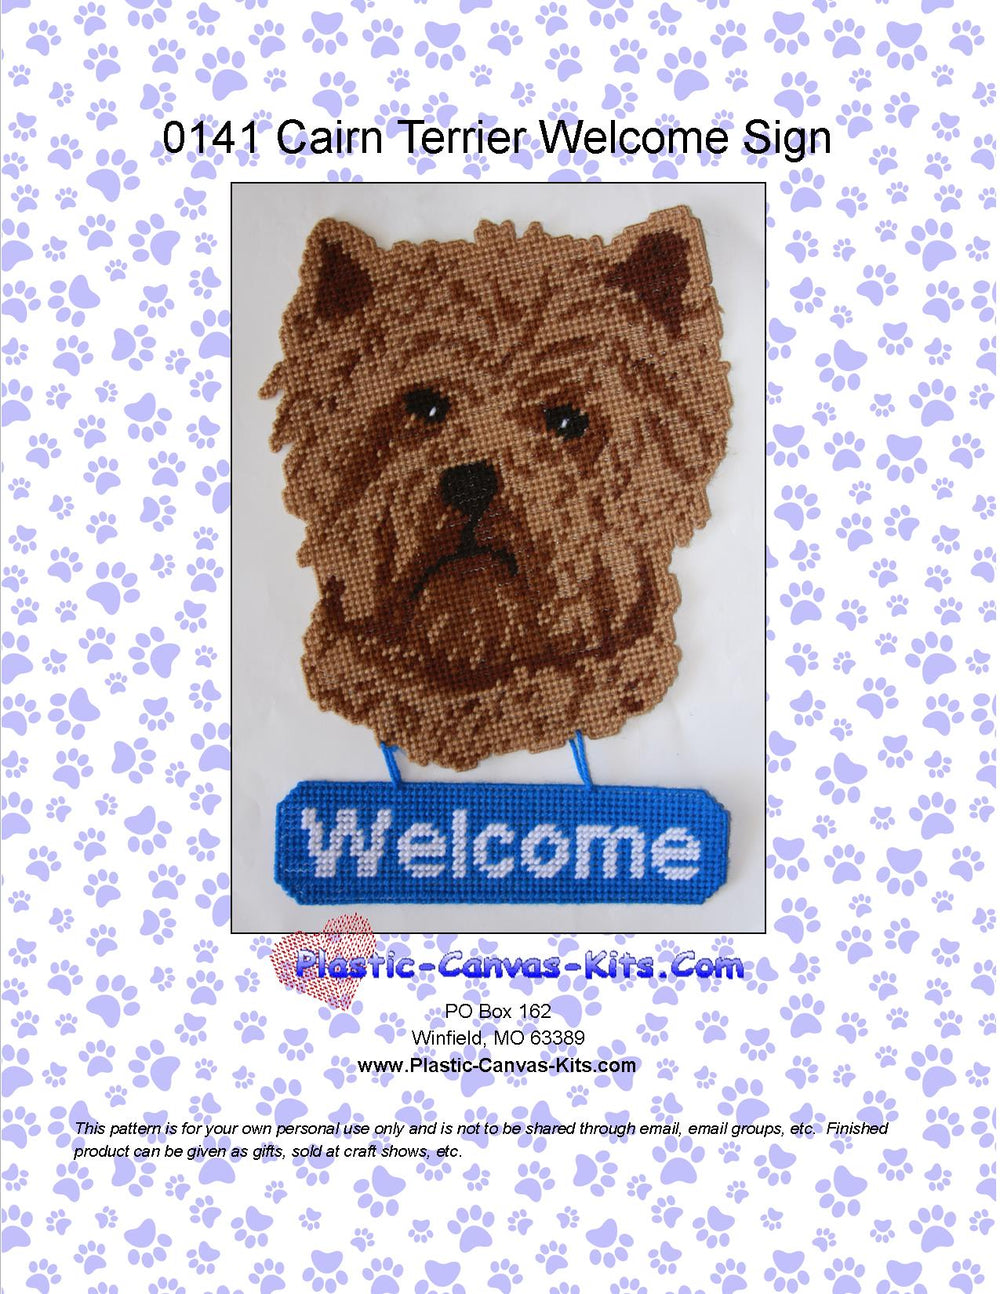 Cairn Terrier Welcome Sign